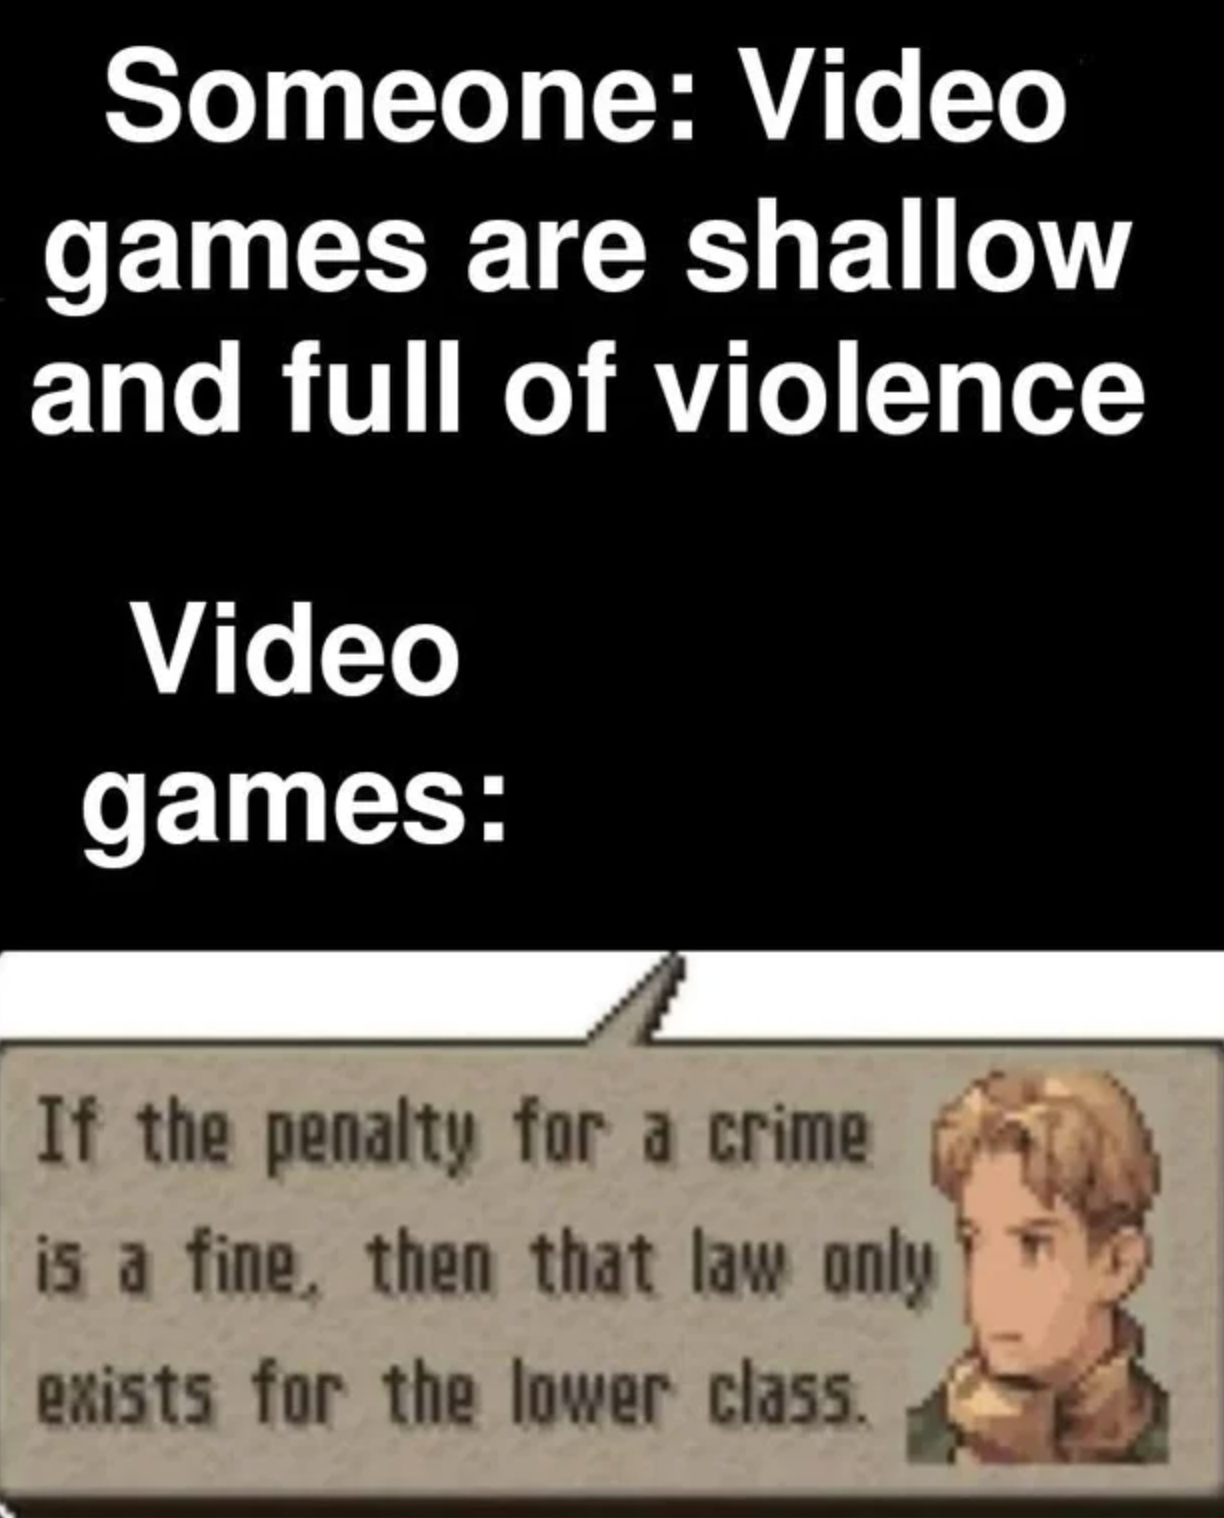 funny gaming memes - gardena pass - Someone Video games are shallow and full of violence Video games If the penalty for a crime is a fine, then that law only exists for the lower class.